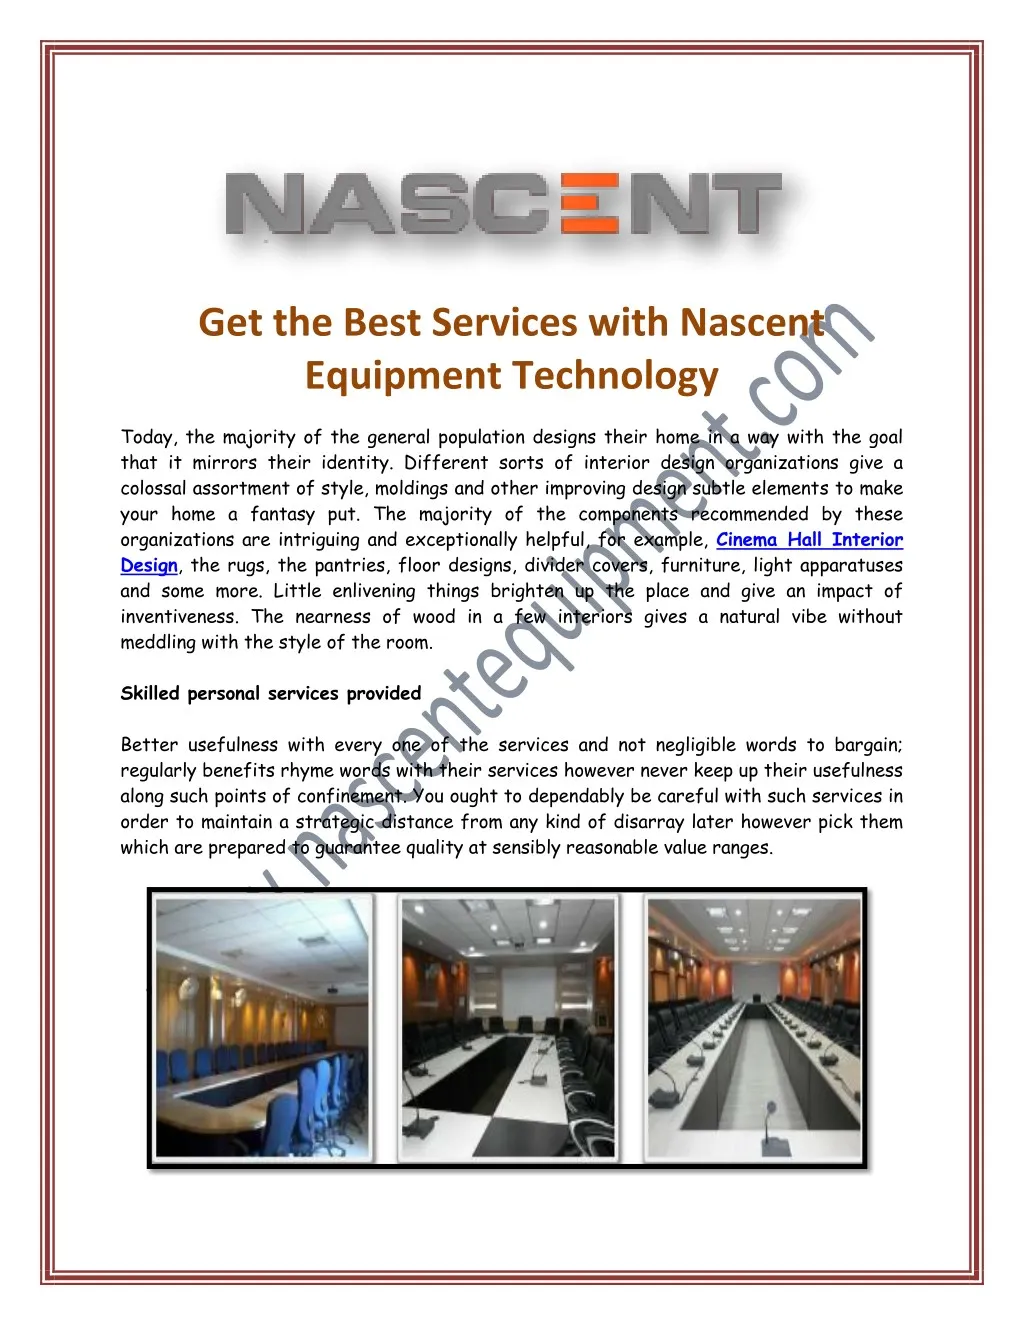 get the best services with nascent equipment